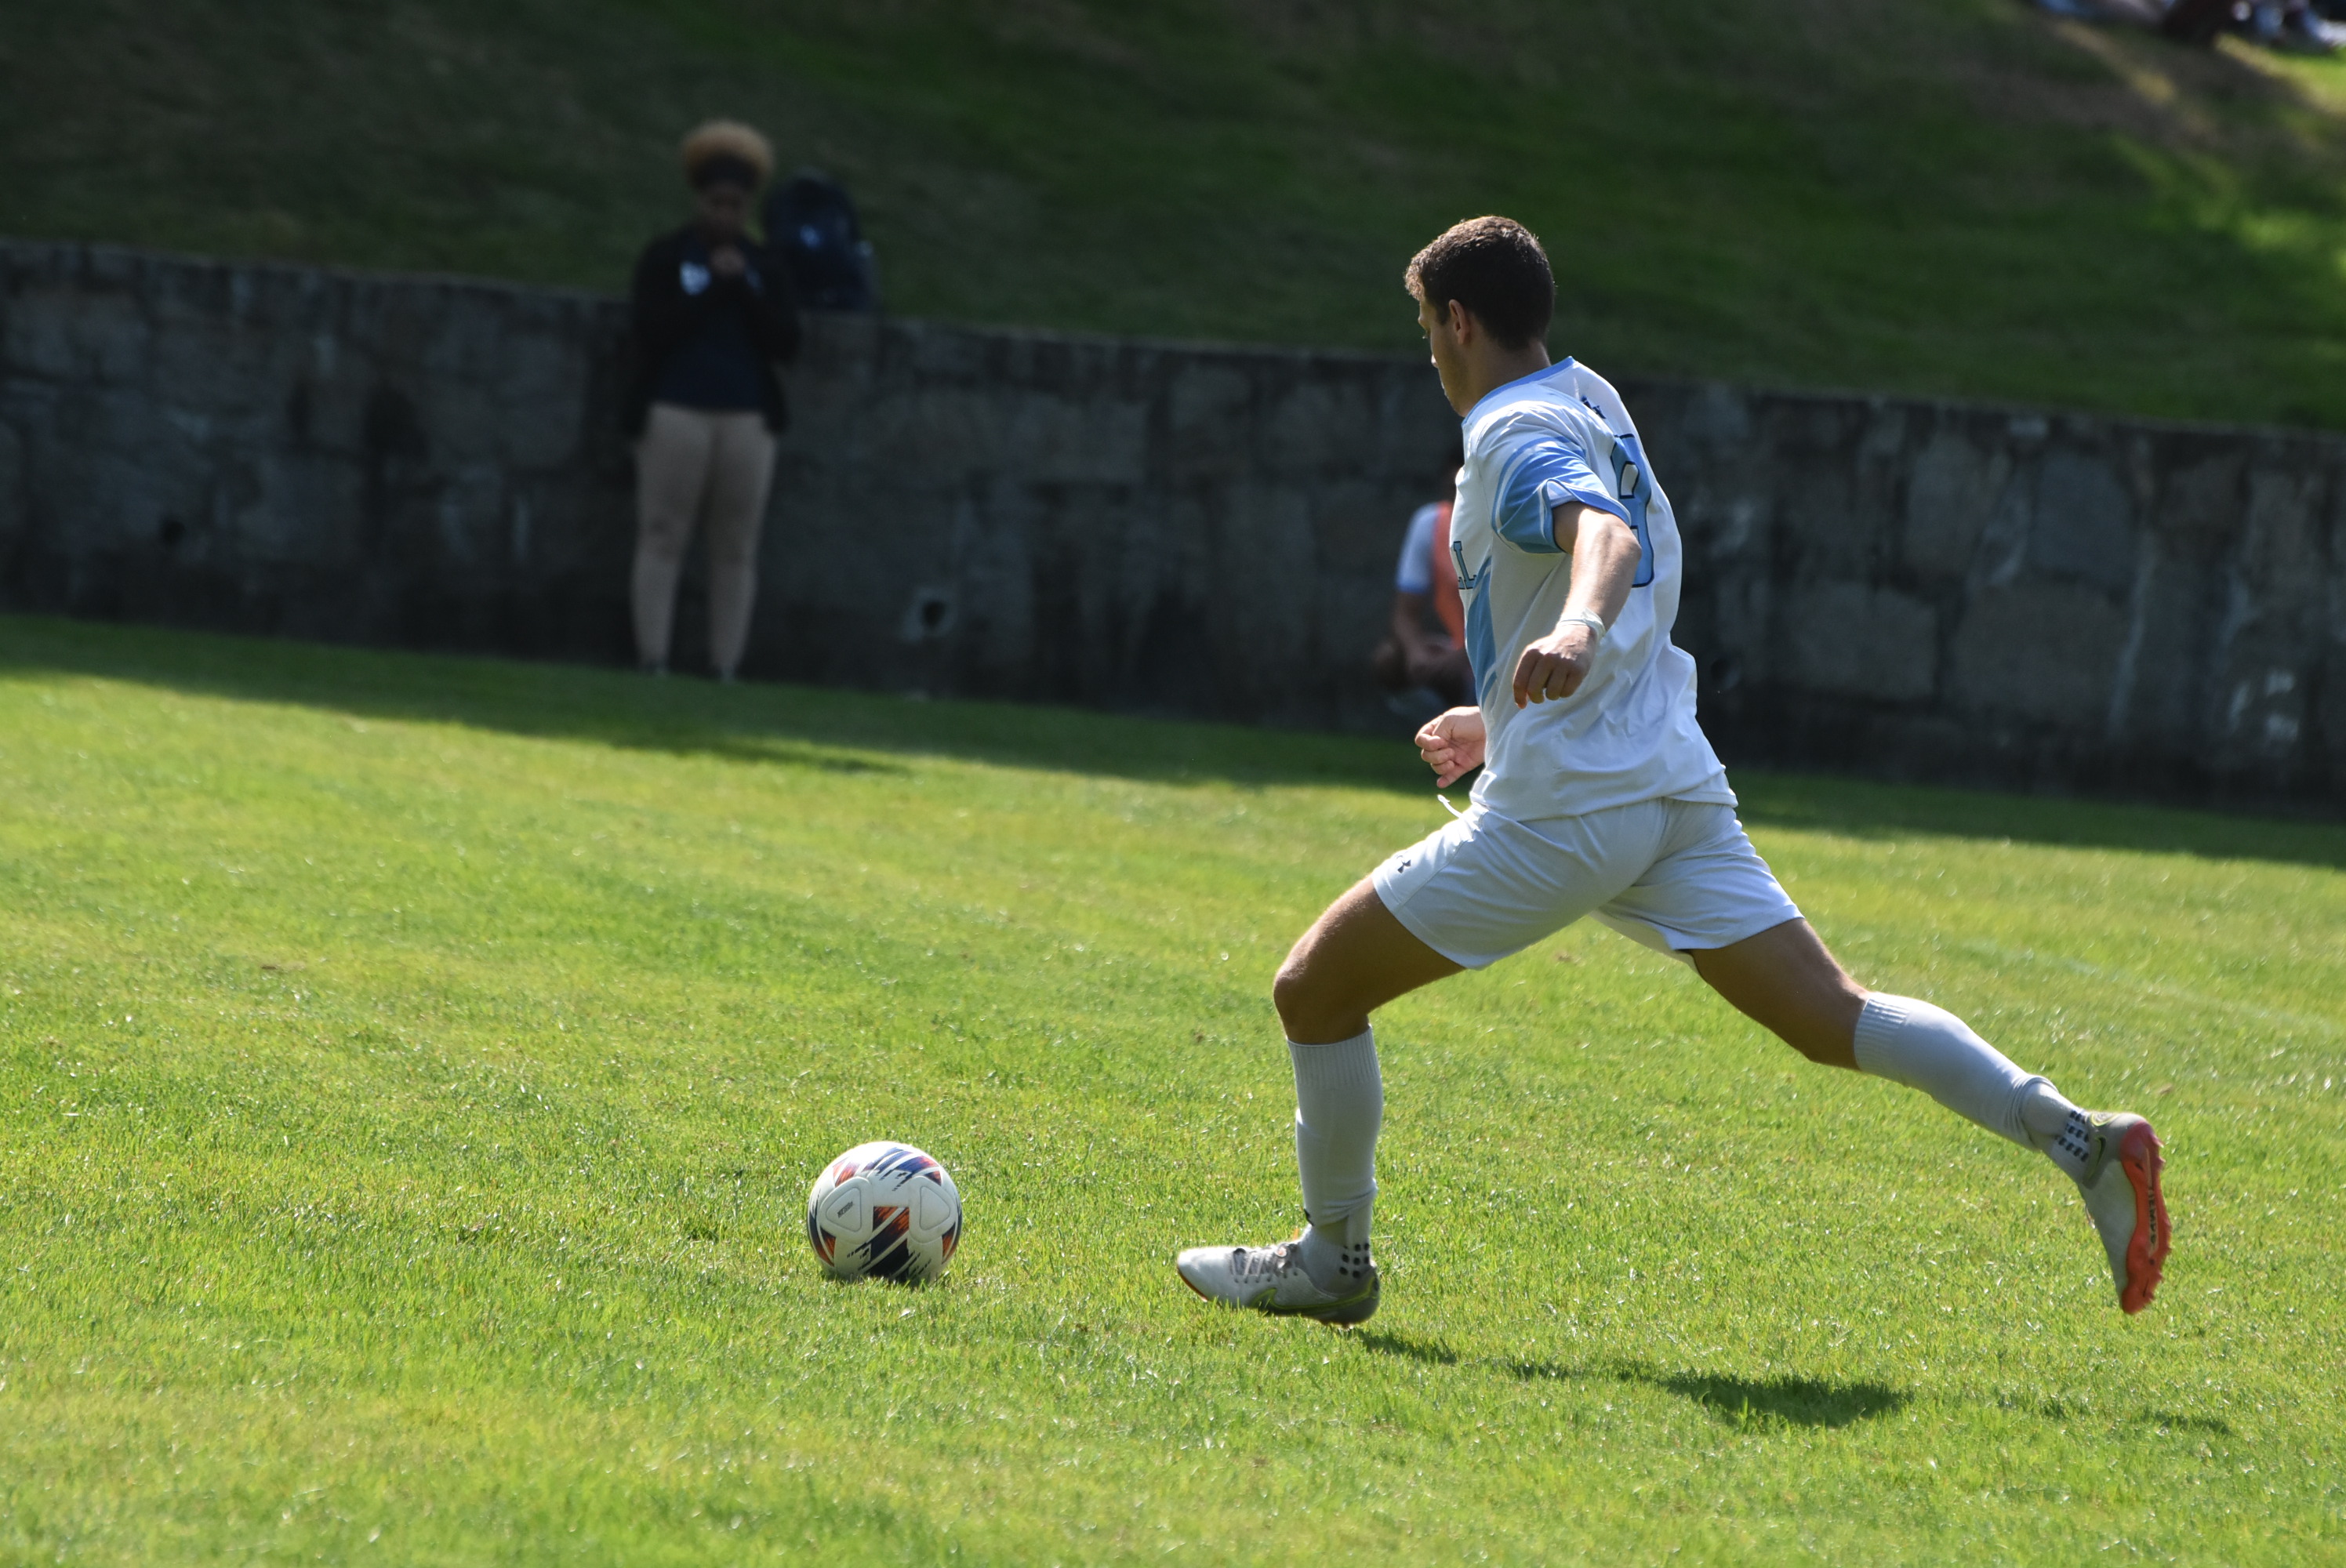 MSOC: Faynstein's hat trick gives Lasers third tie of season